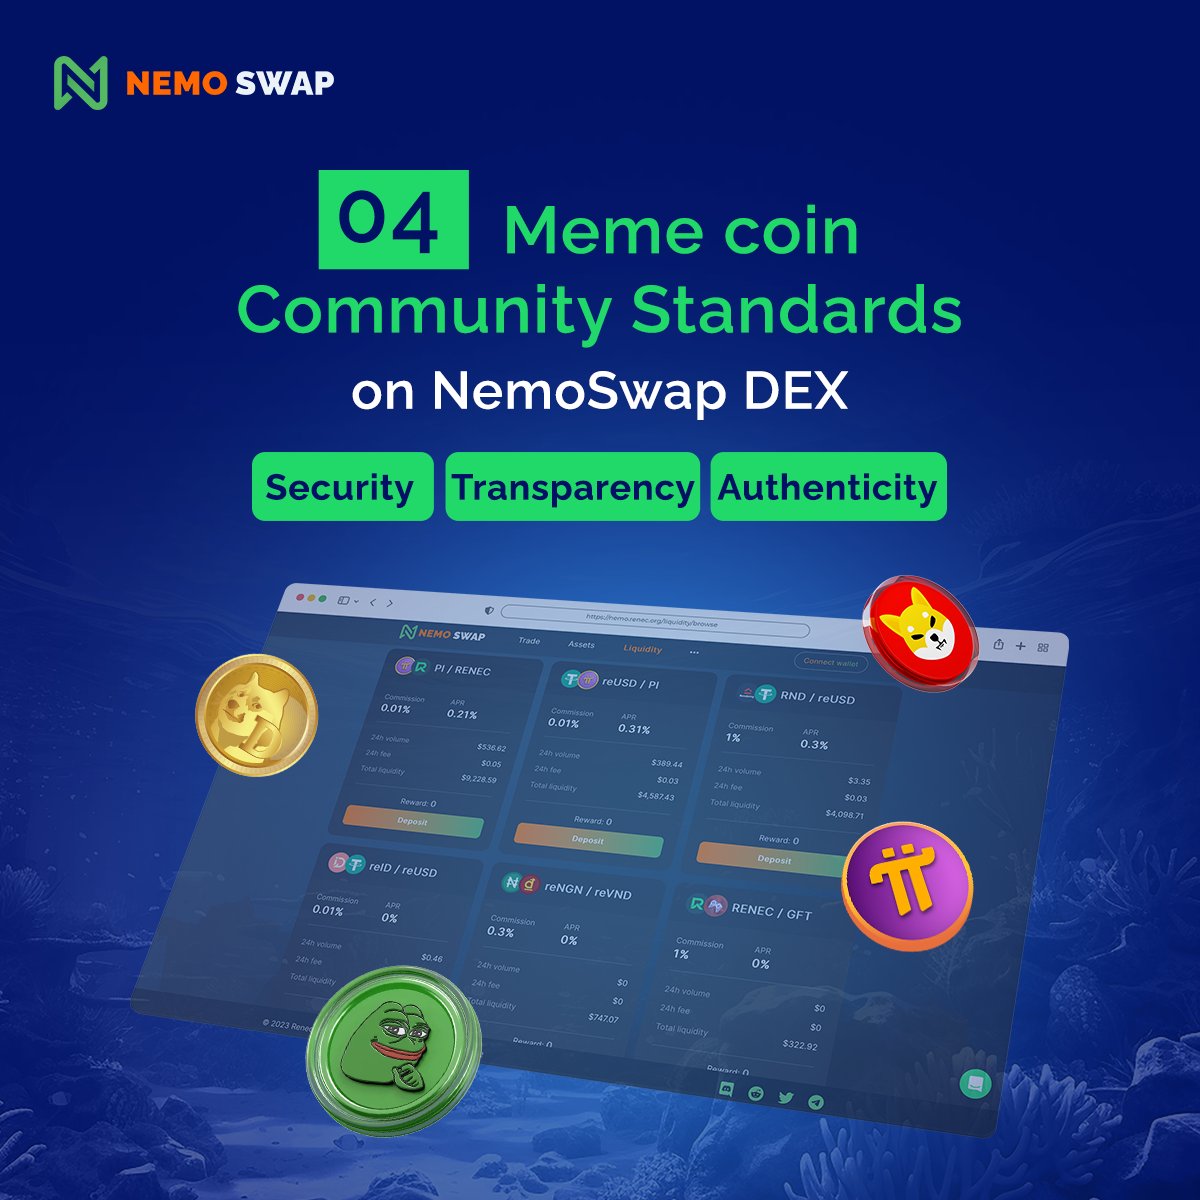 🌟 While meme coins can skyrocket fortunes, they can also lead to sudden losses. 🐠 Yet, we know you adore meme coins 🐠 To ensure a secure trading environment, we've unveiled 04 Community Standards for Meme coin listings on NemoSwap DEX. 👉 Read more: renec.org/blog/memecoin-……